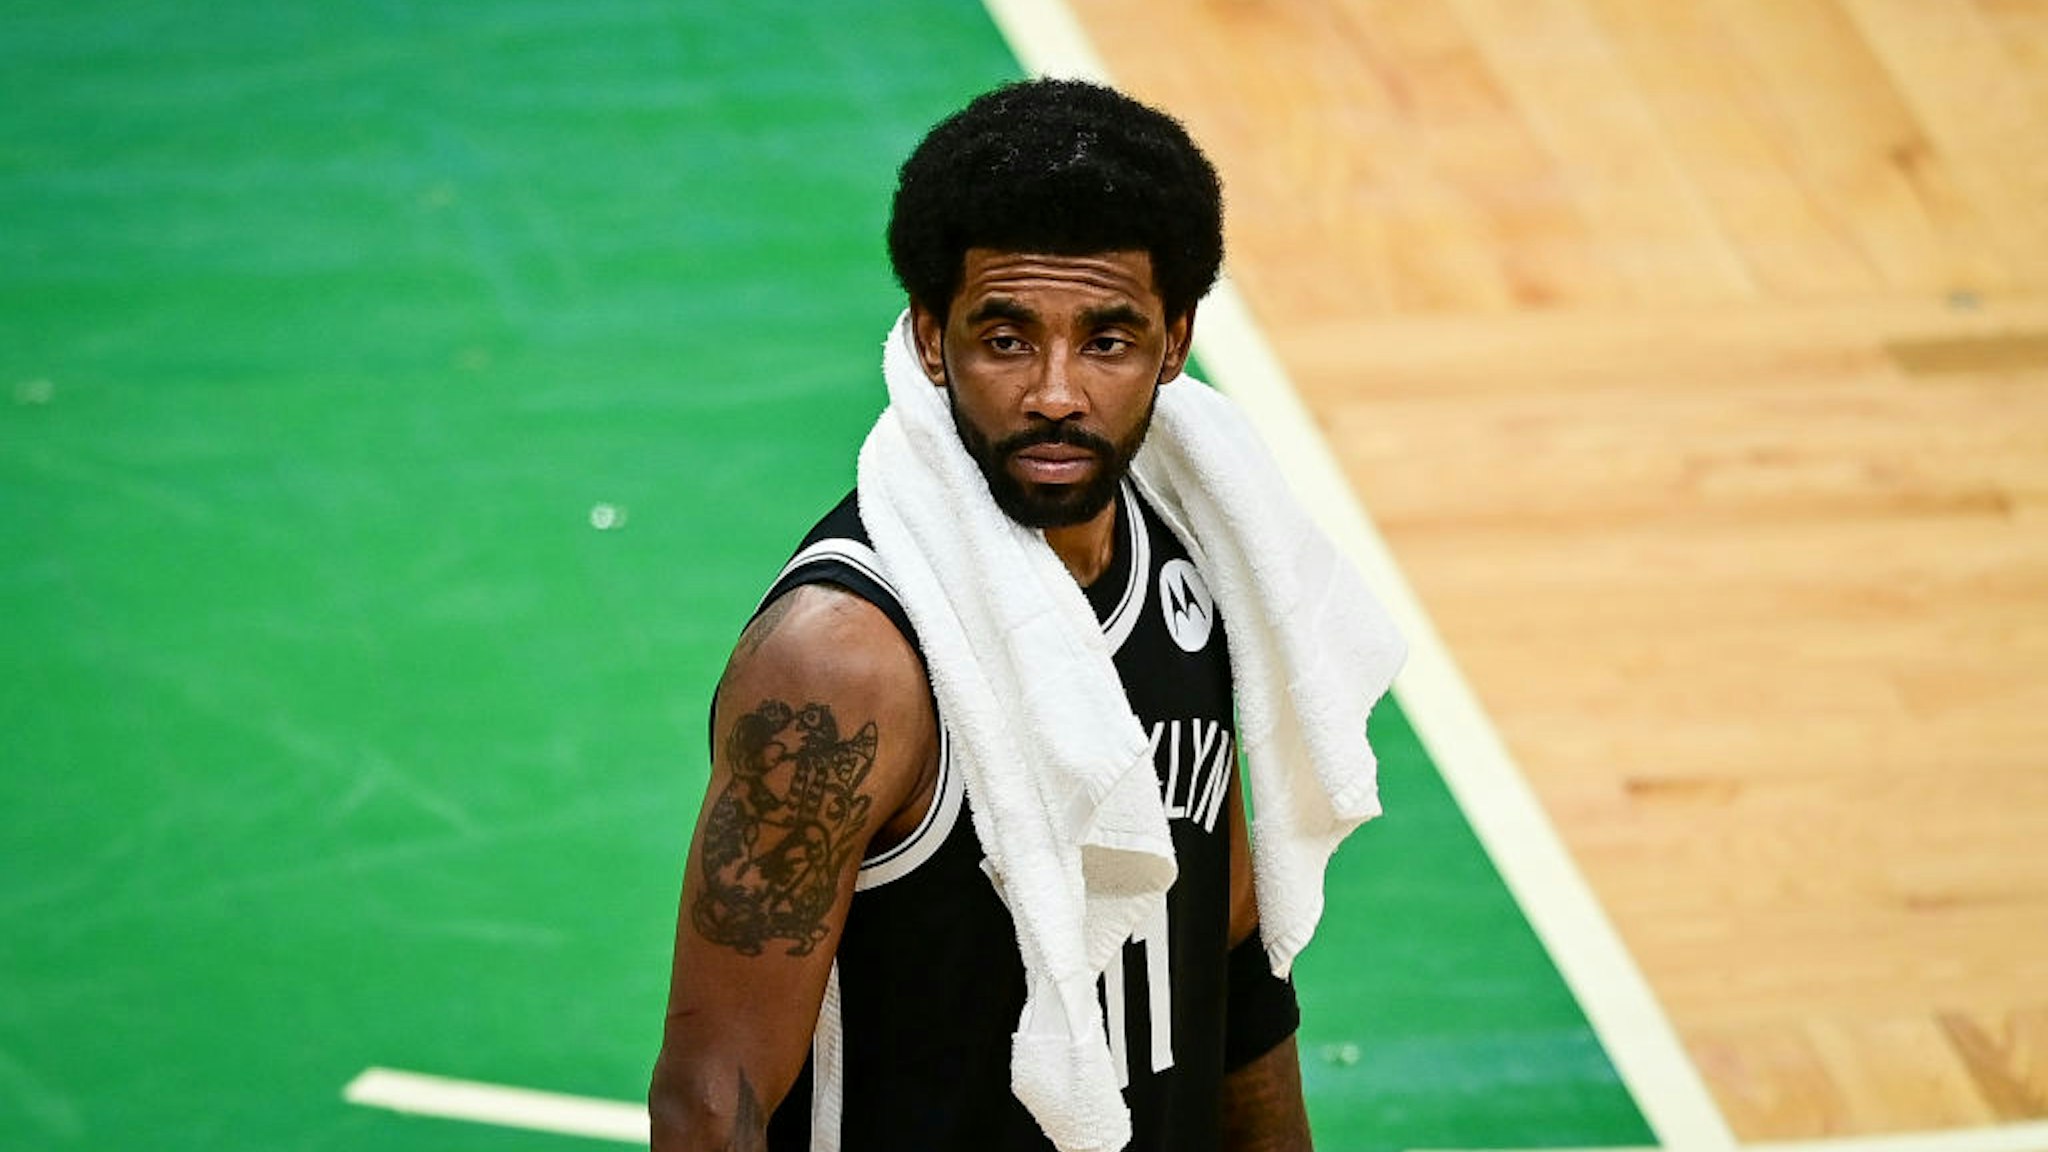 BOSTON, MASSACHUSETTS - MAY 30: Kyrie Irving #11 of the Brooklyn Nets looks on during Game Four of the Eastern Conference first round series against the Boston Celtics at TD Garden on May 30, 2021 in Boston, Massachusetts. NOTE TO USER: User expressly acknowledges and agrees that, by downloading and or using this photograph, User is consenting to the terms and conditions of the Getty Images License Agreement. (Photo by Maddie Malhotra/Getty Images)